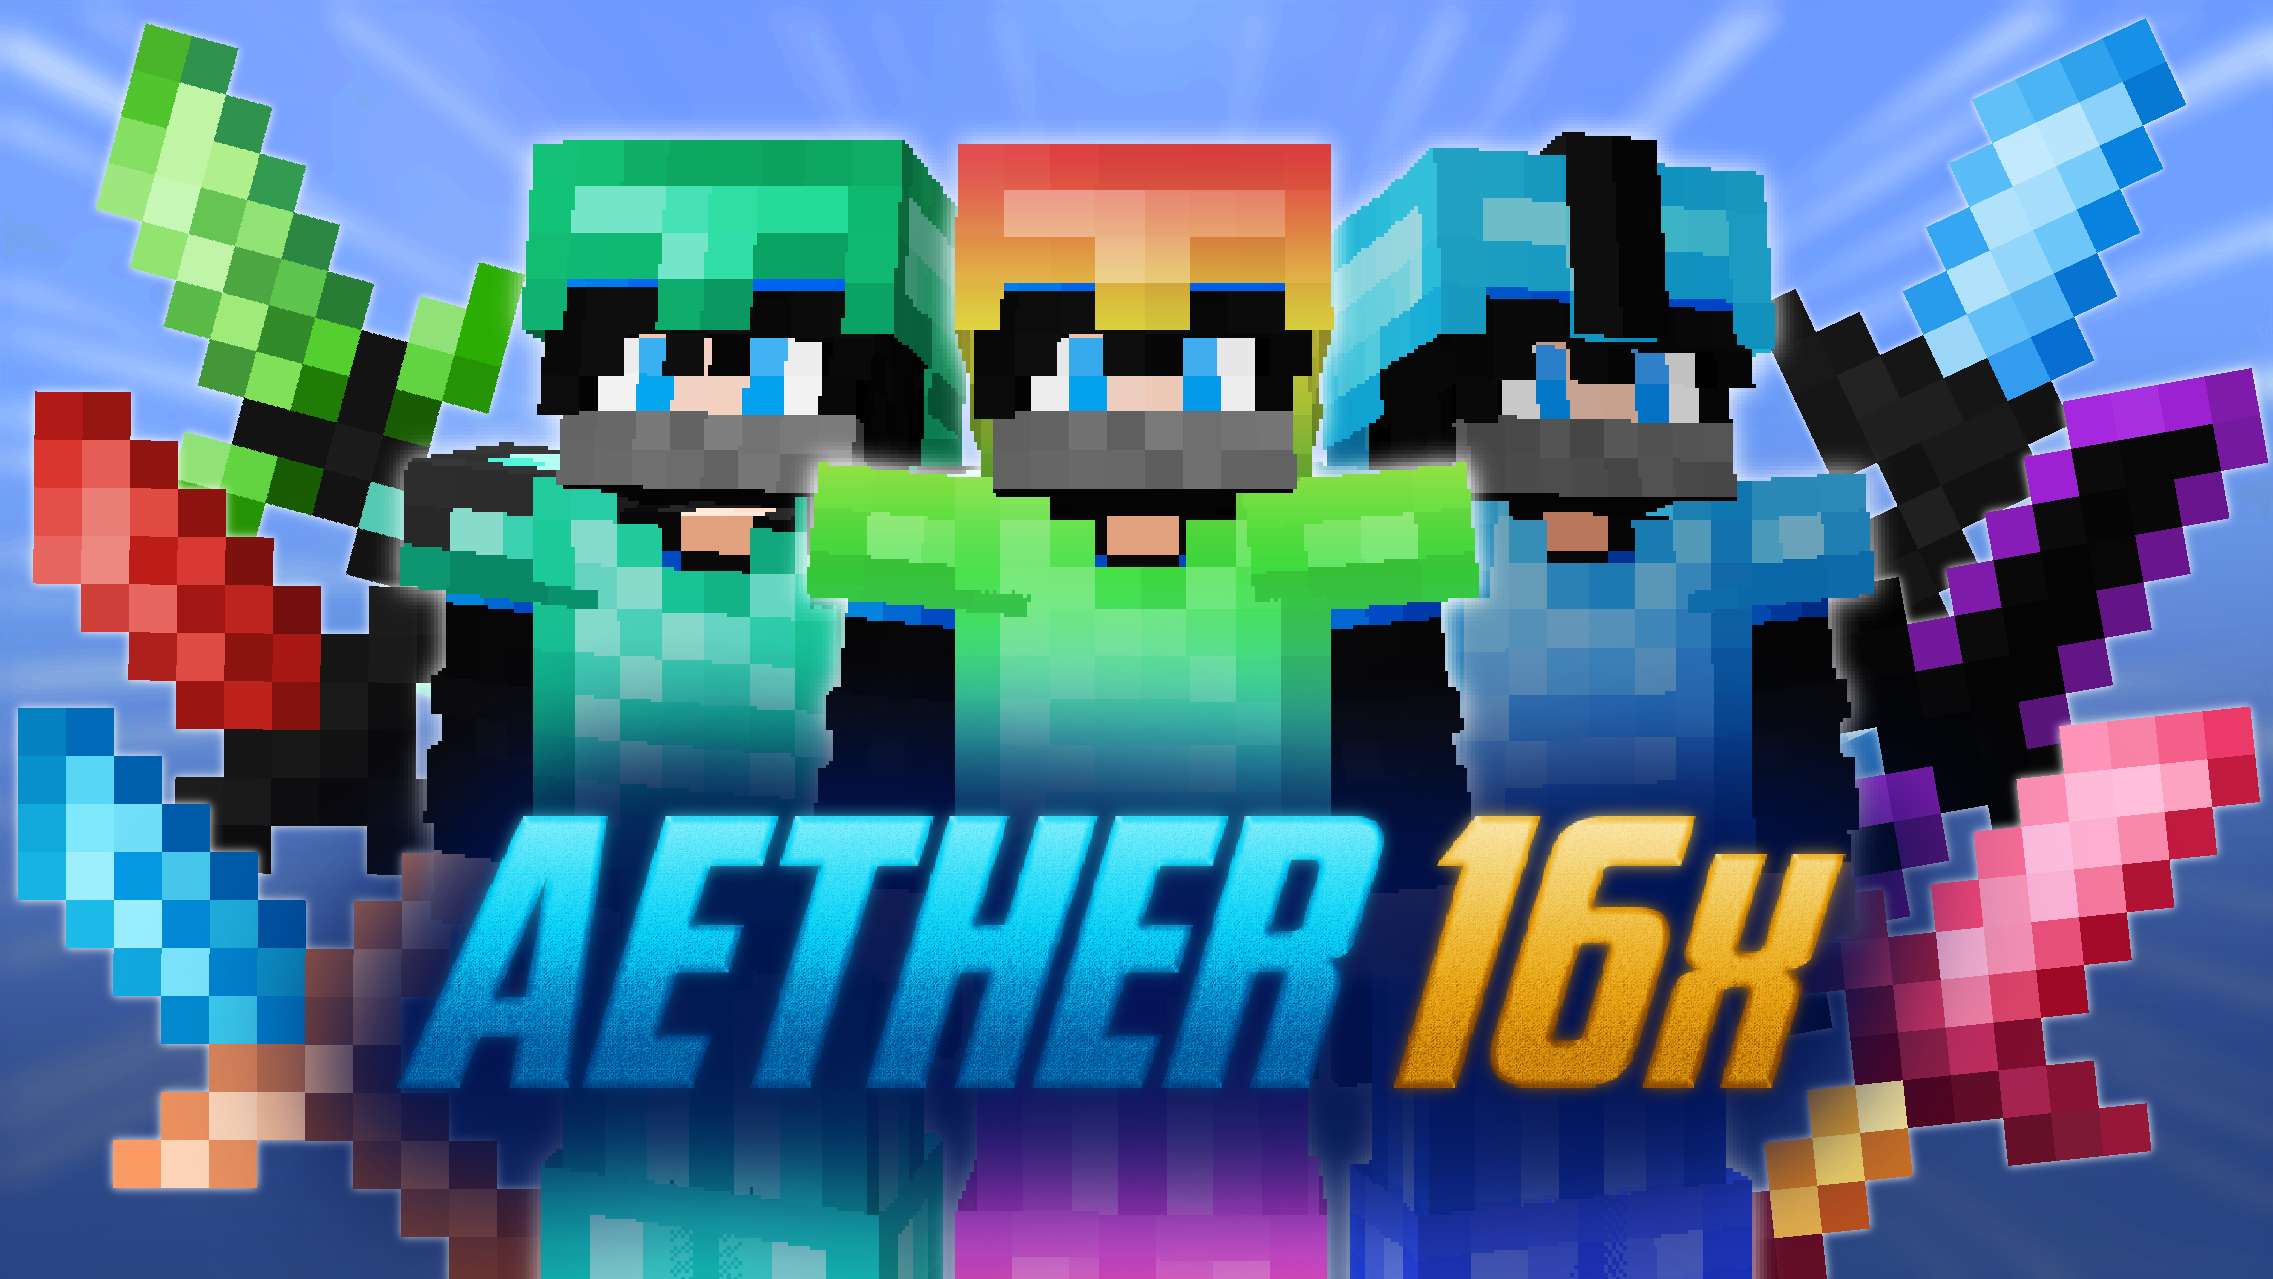 Aether  [NotroDan] 16x by Mqryo on PvPRP